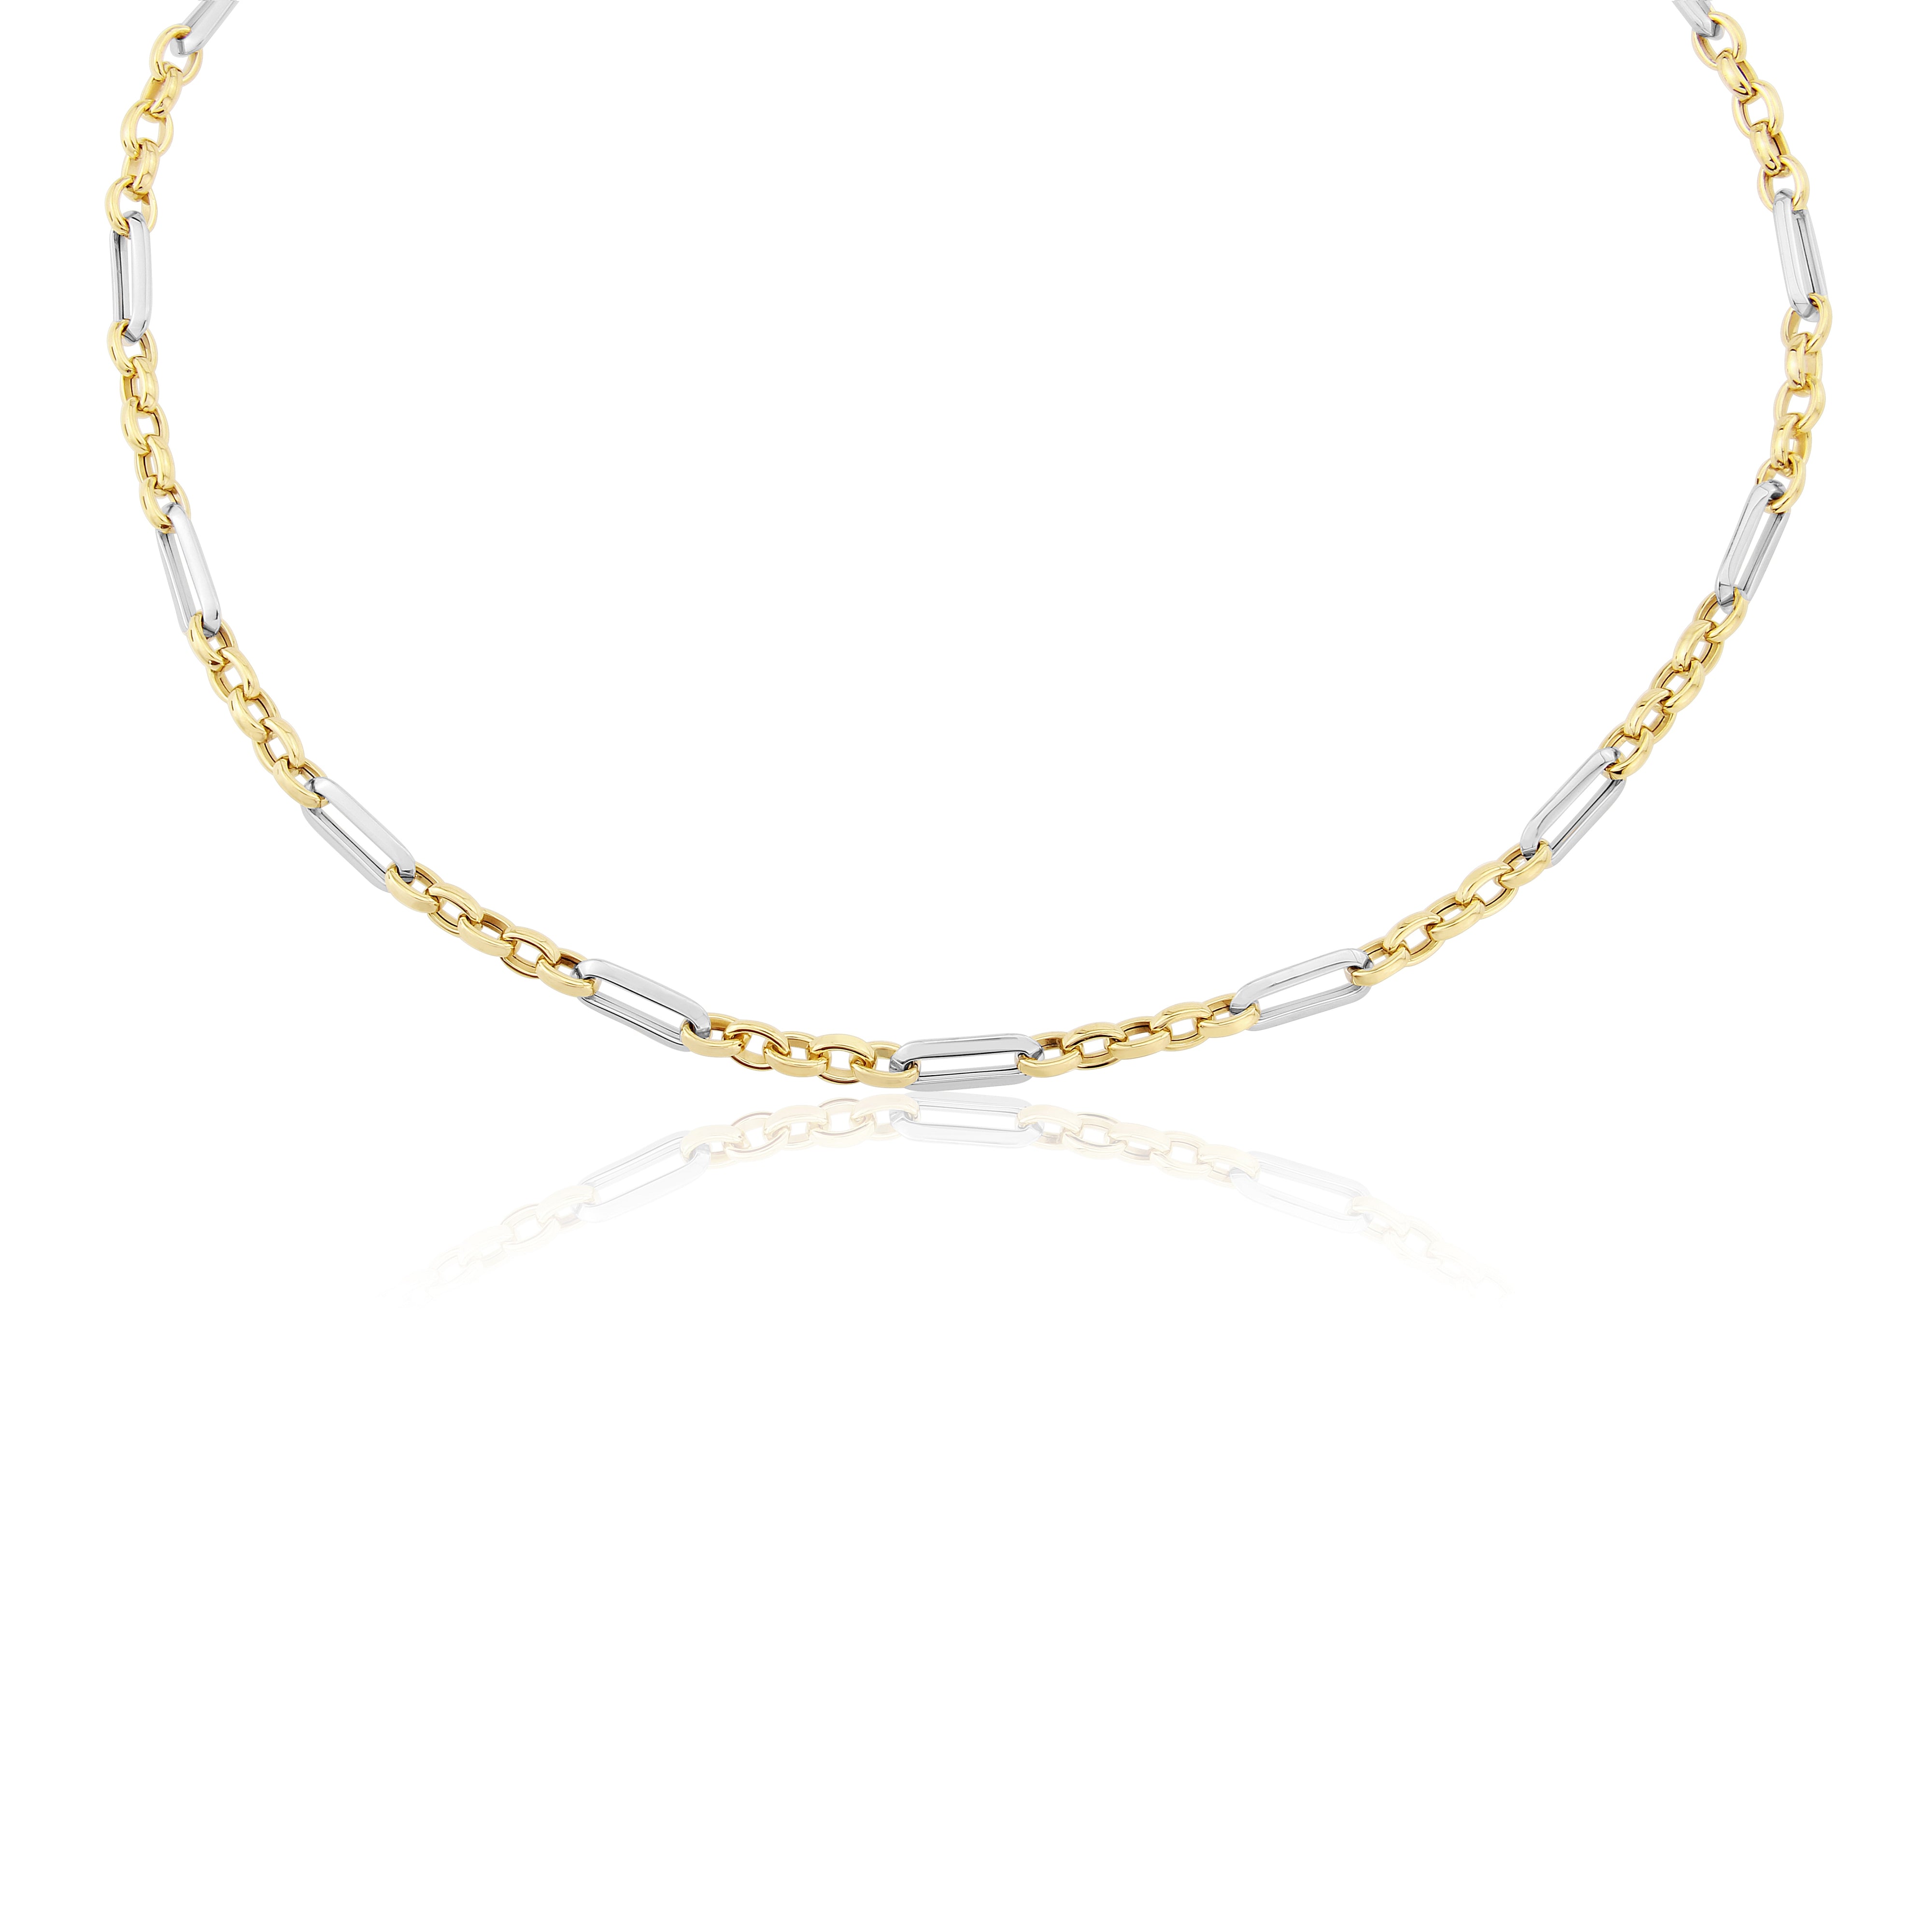 YELLOW AND WHITE GOLD LINK NECKLACE